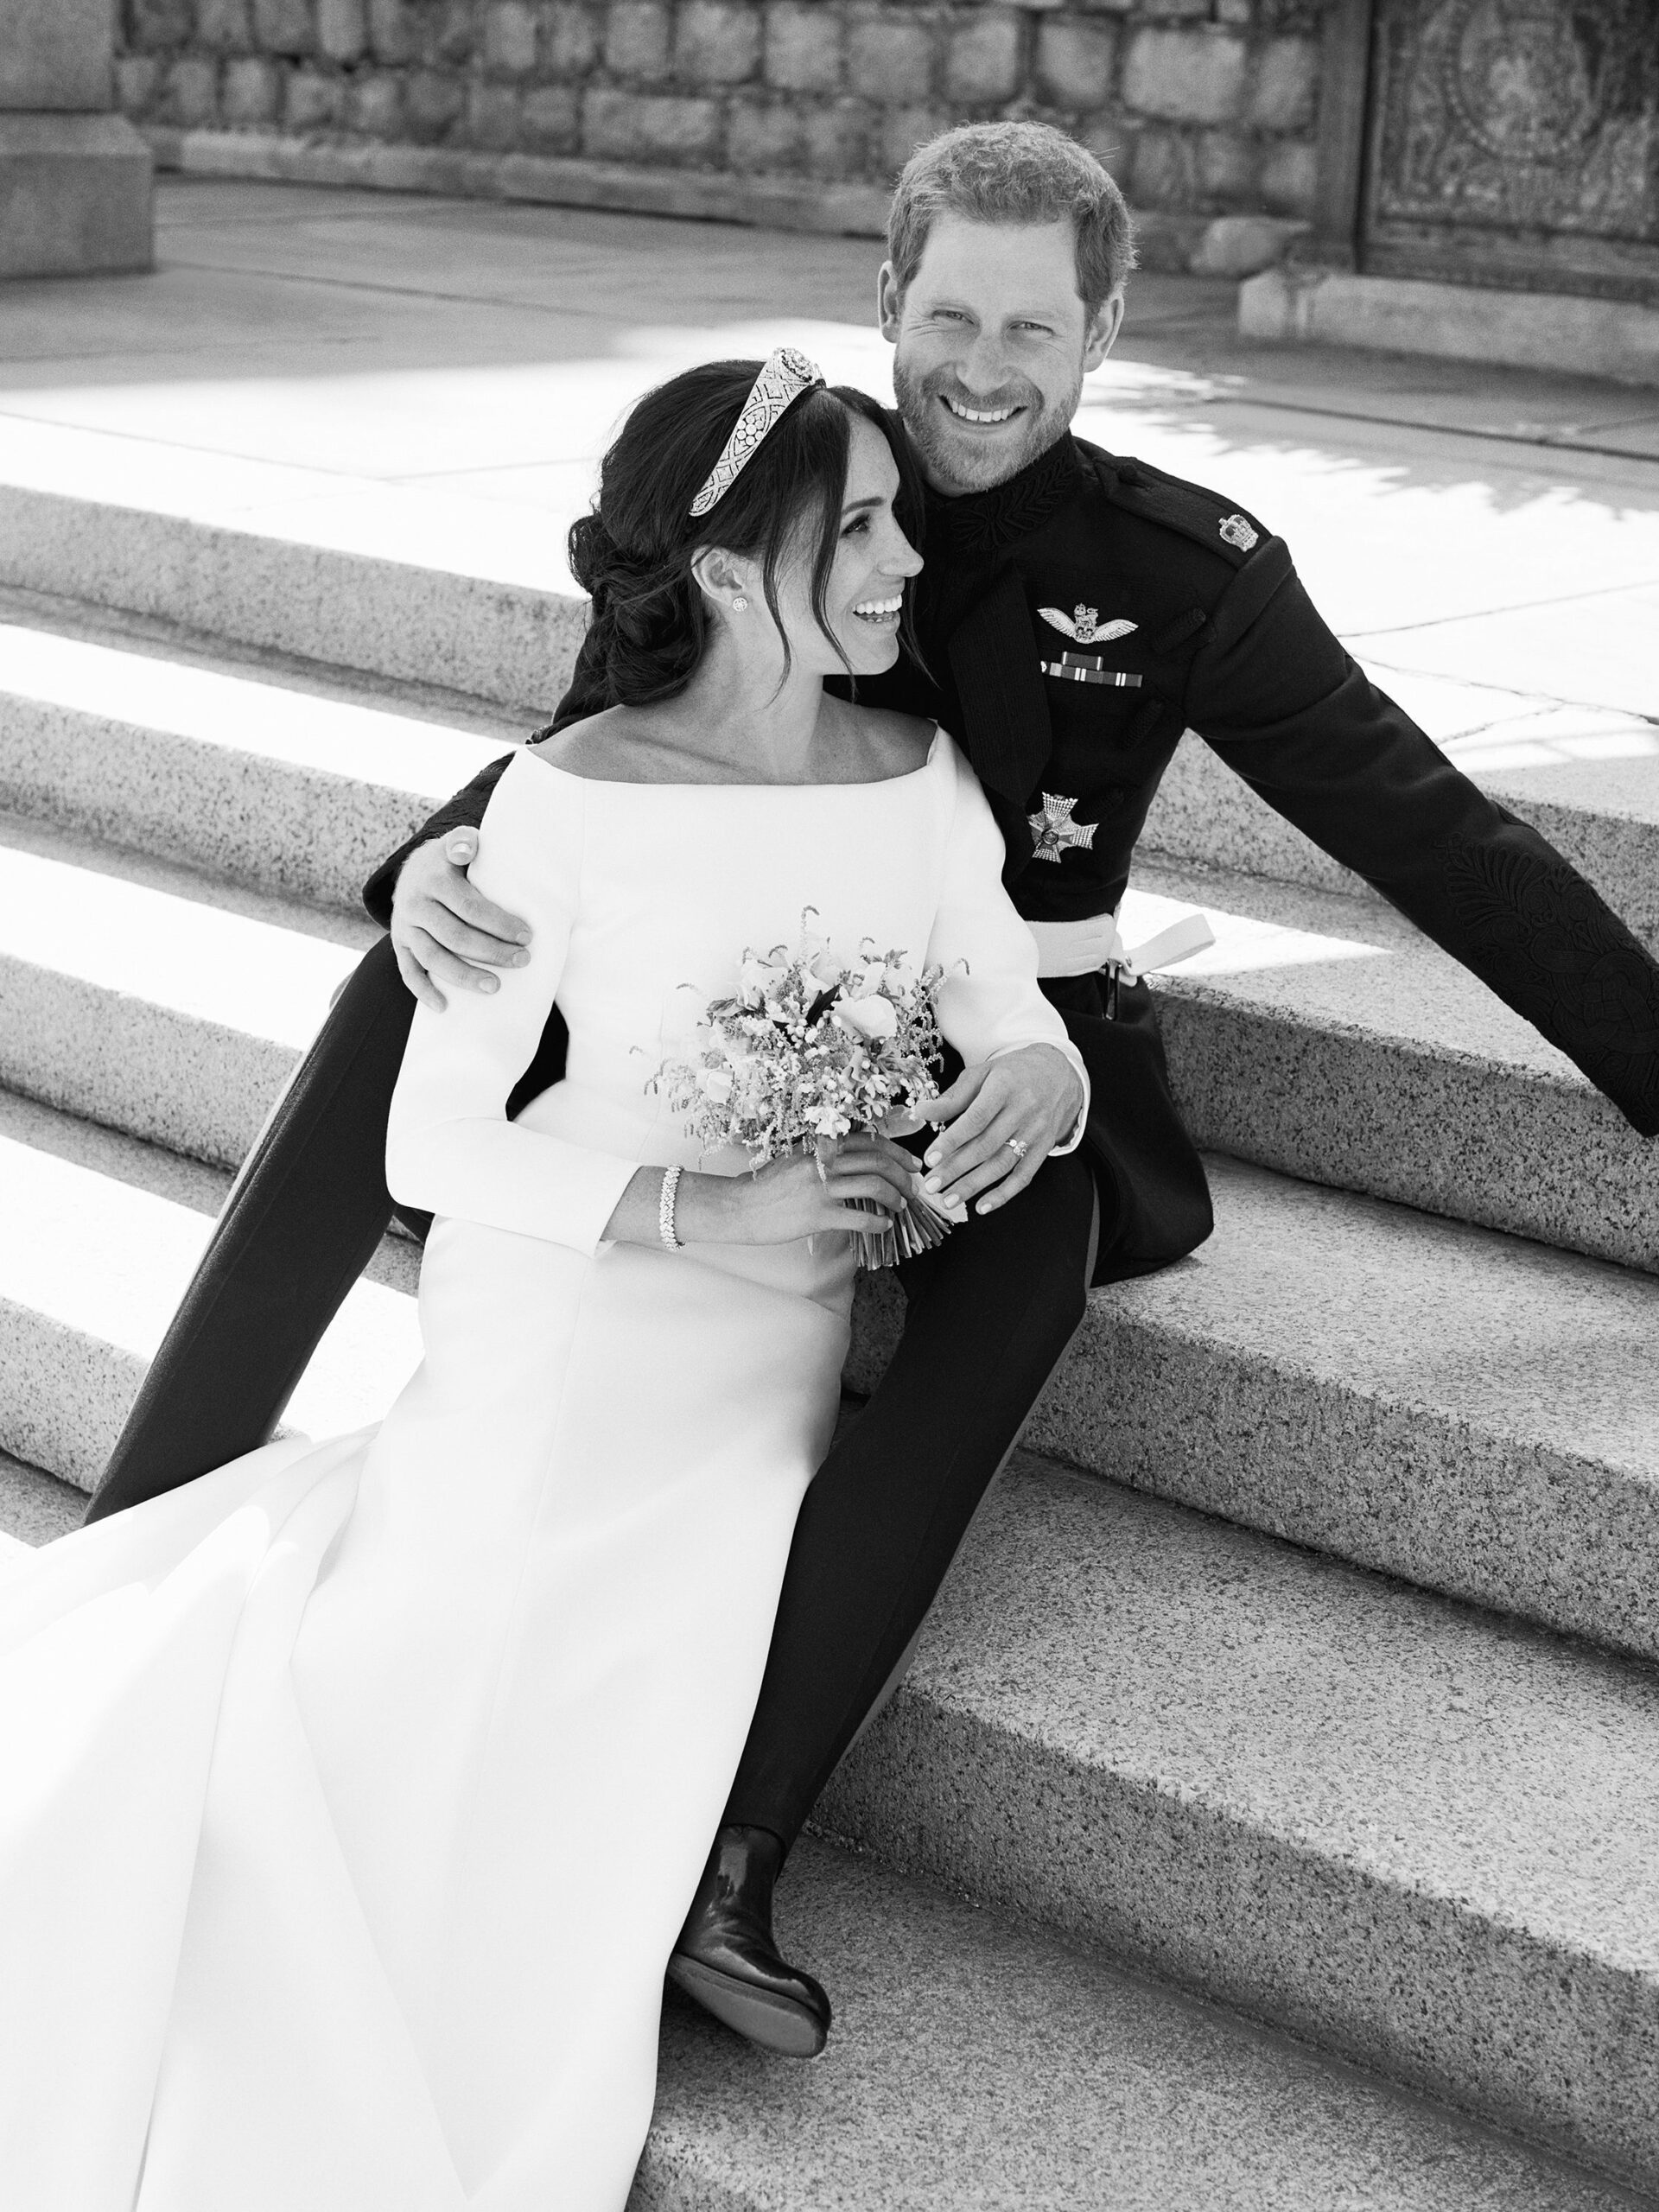 Official portrait of Prince Harry and Meghan Markle